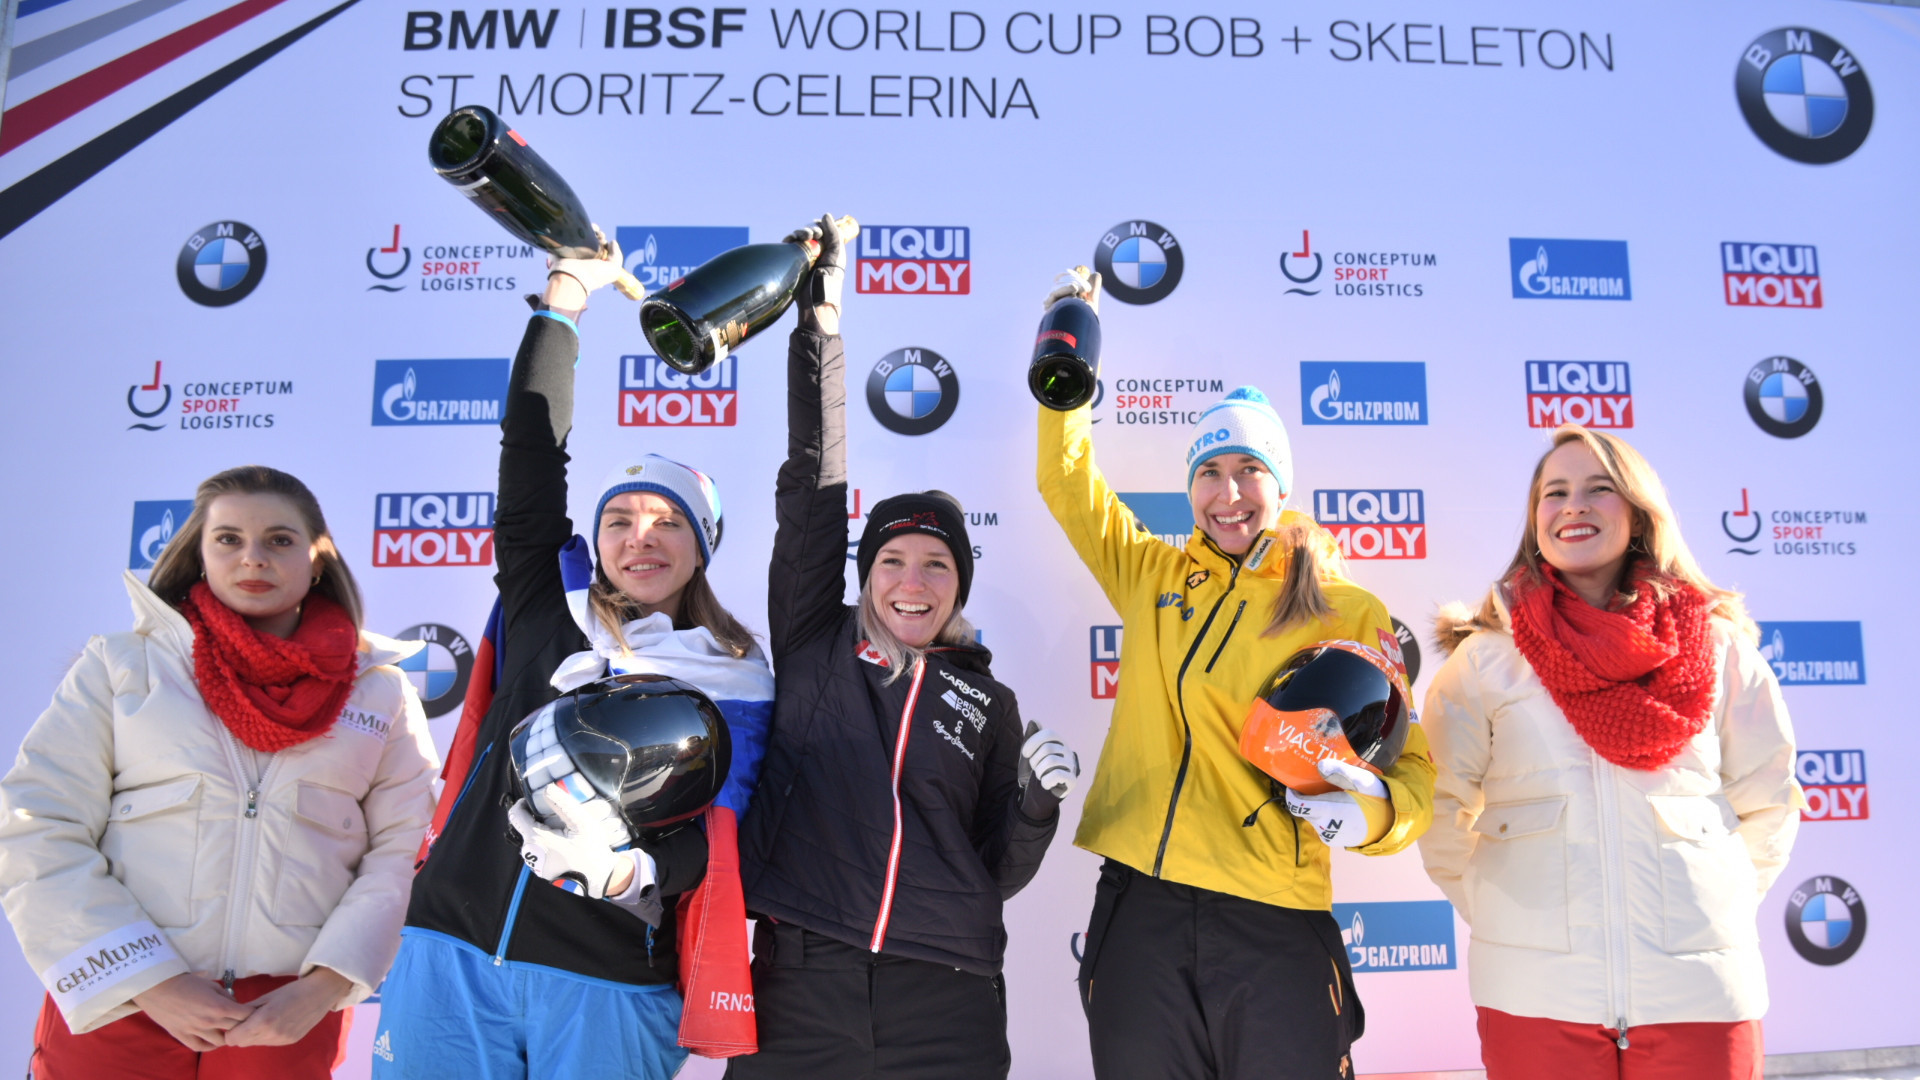 Canada's Mirela Rahneva, centre, won the IBSF World Cup women's skeleton race in St Moritz, with Russia's Elena Nikitina, left, in second and Germany's Jacqueline Loelling, right, in third ©IBSF